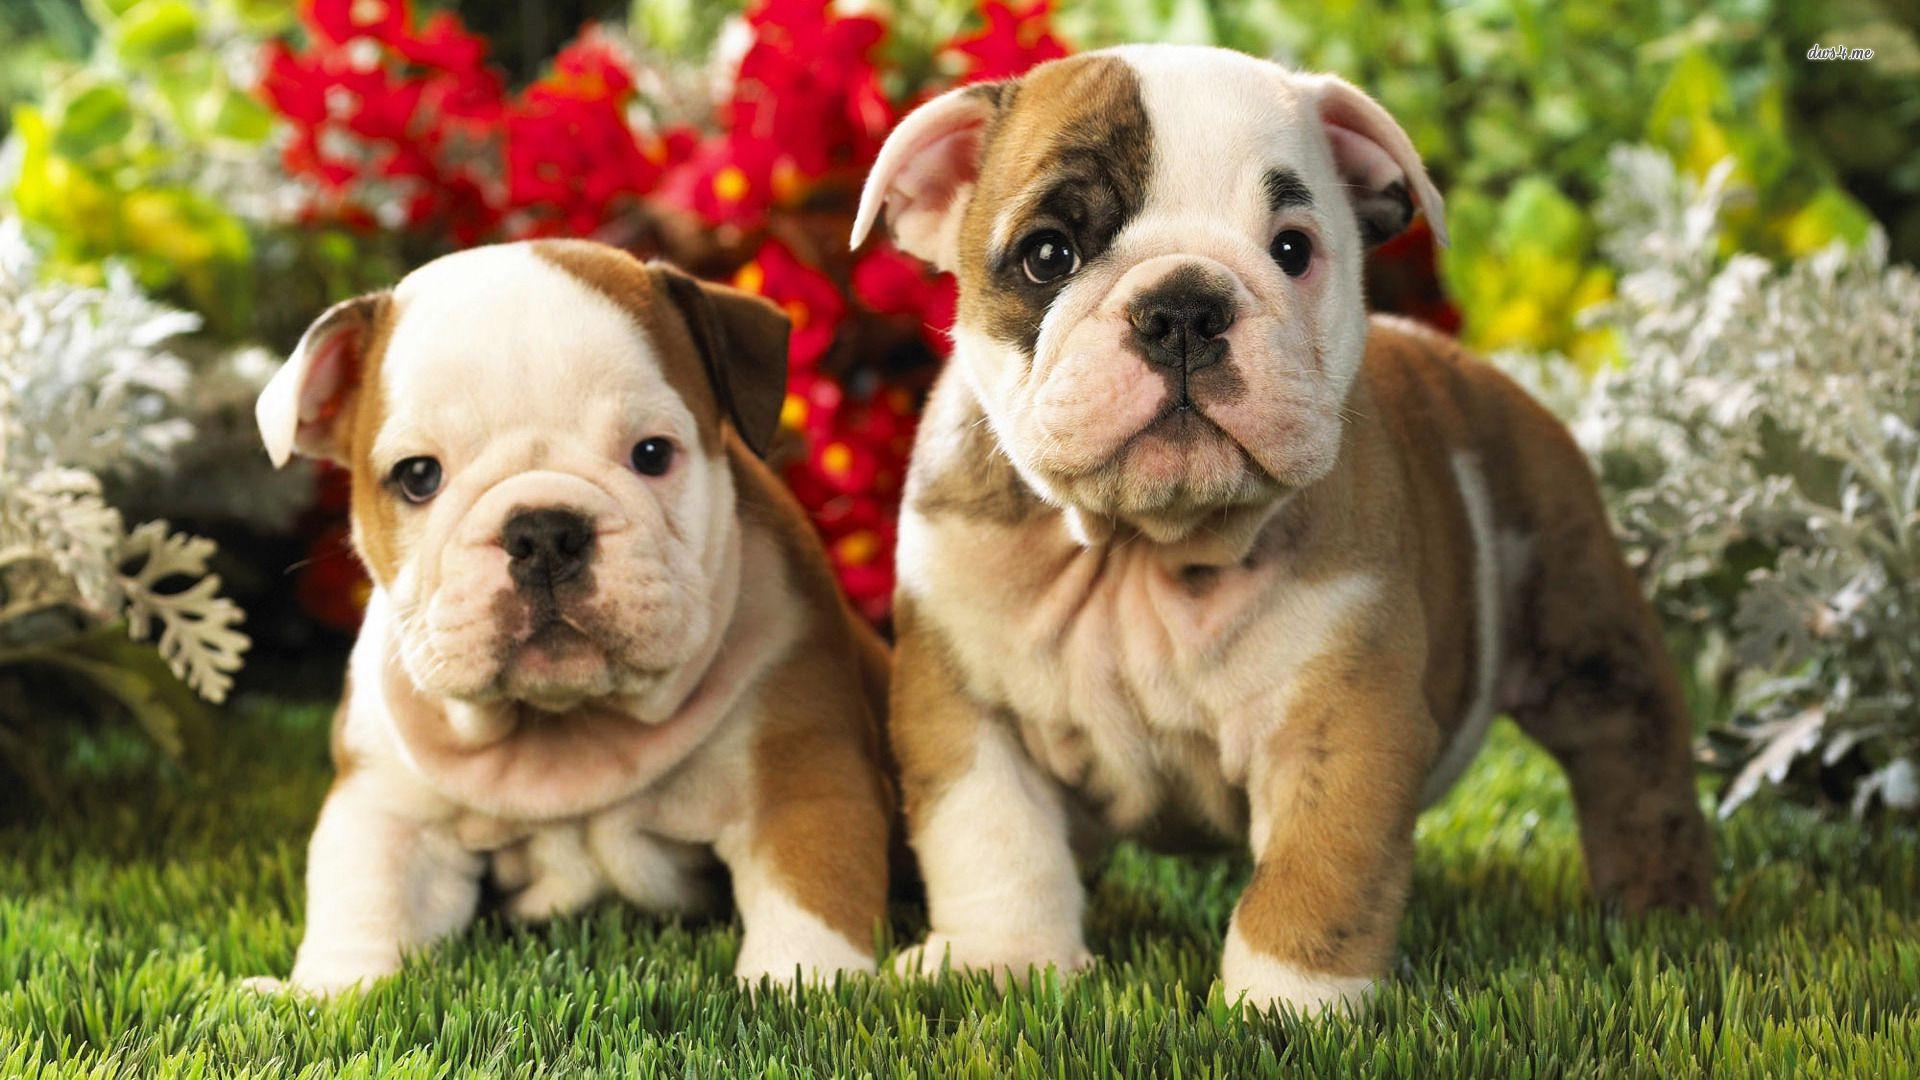 Collection of Puppy Wallpaper on HDWallpaper